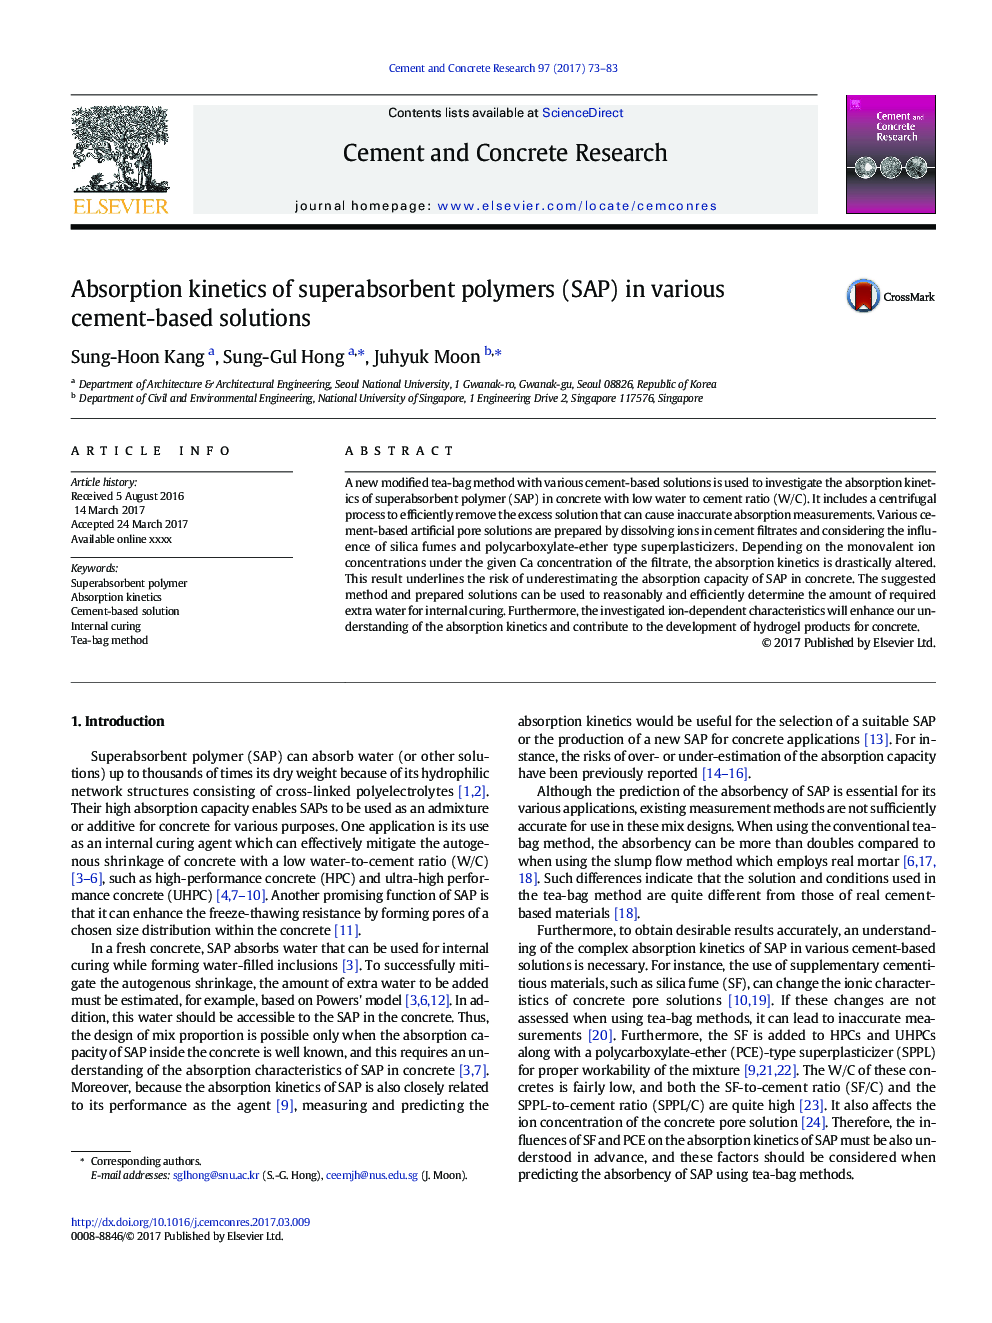 Absorption kinetics of superabsorbent polymers (SAP) in various cement-based solutions